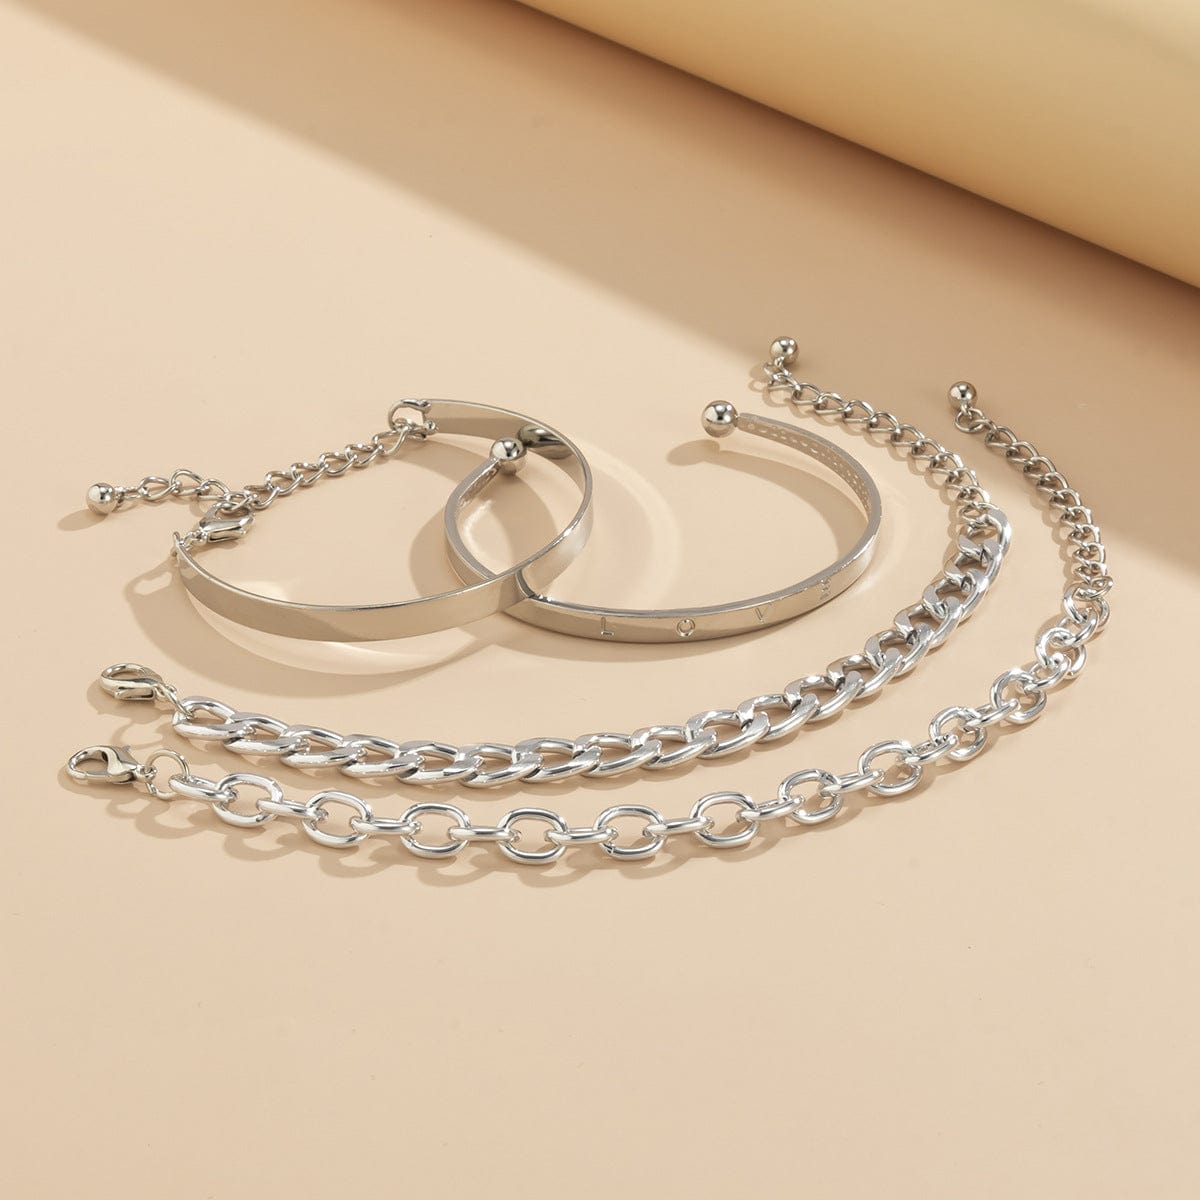 BROOCHITON Bracelets Simple And Smooth C-shaped Hollow Chain Bracelet Set